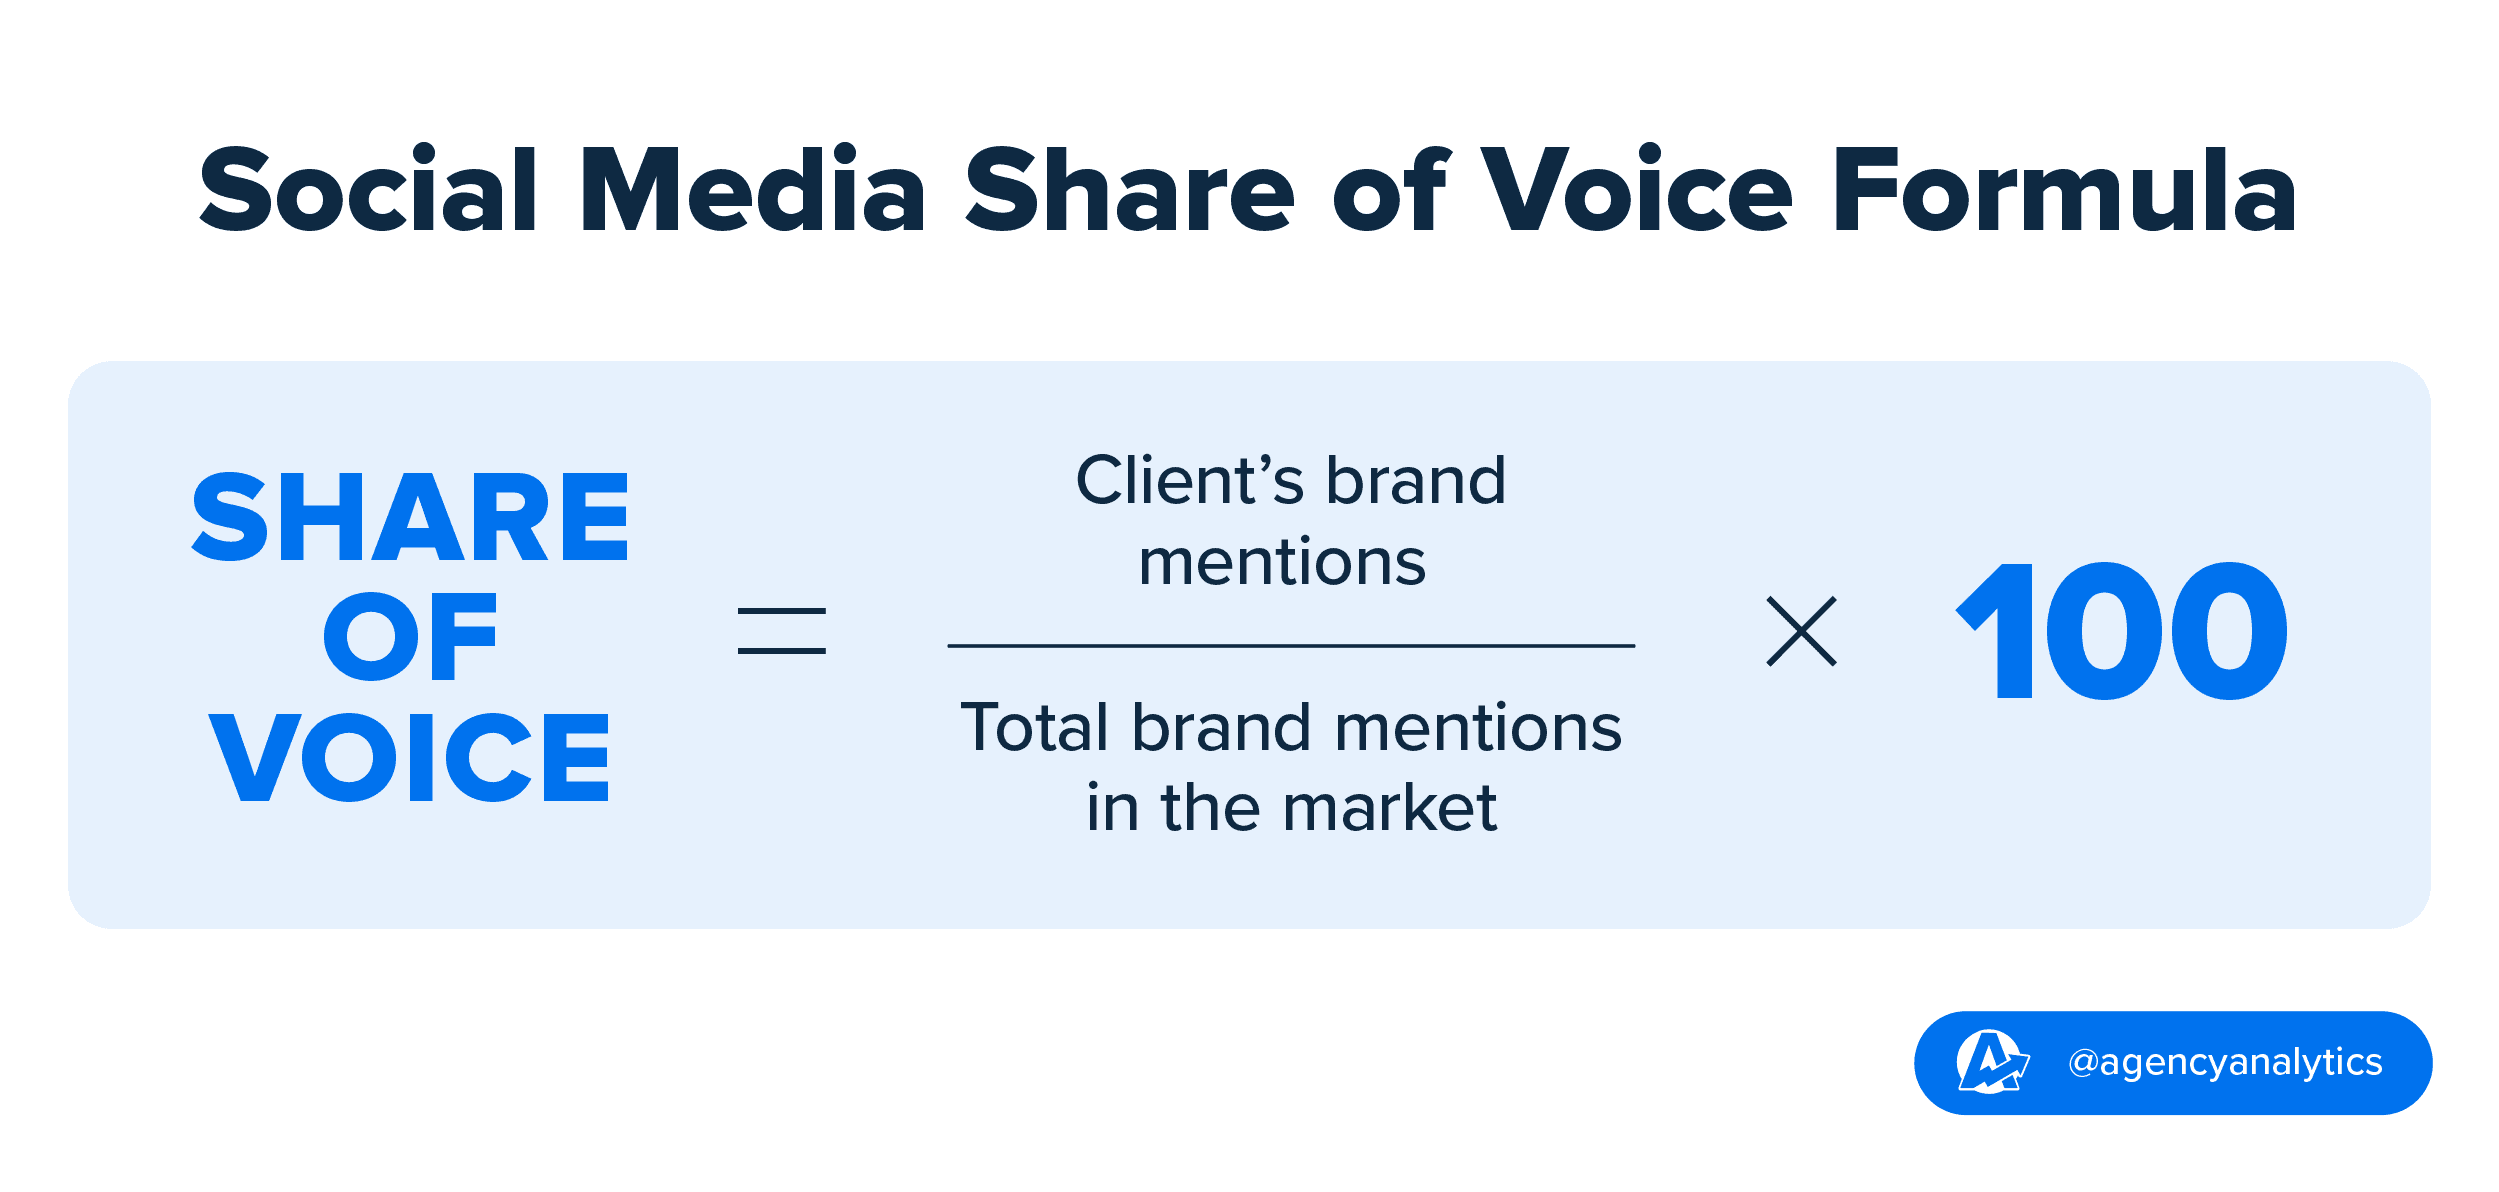 How to measure and improve share of voice formula